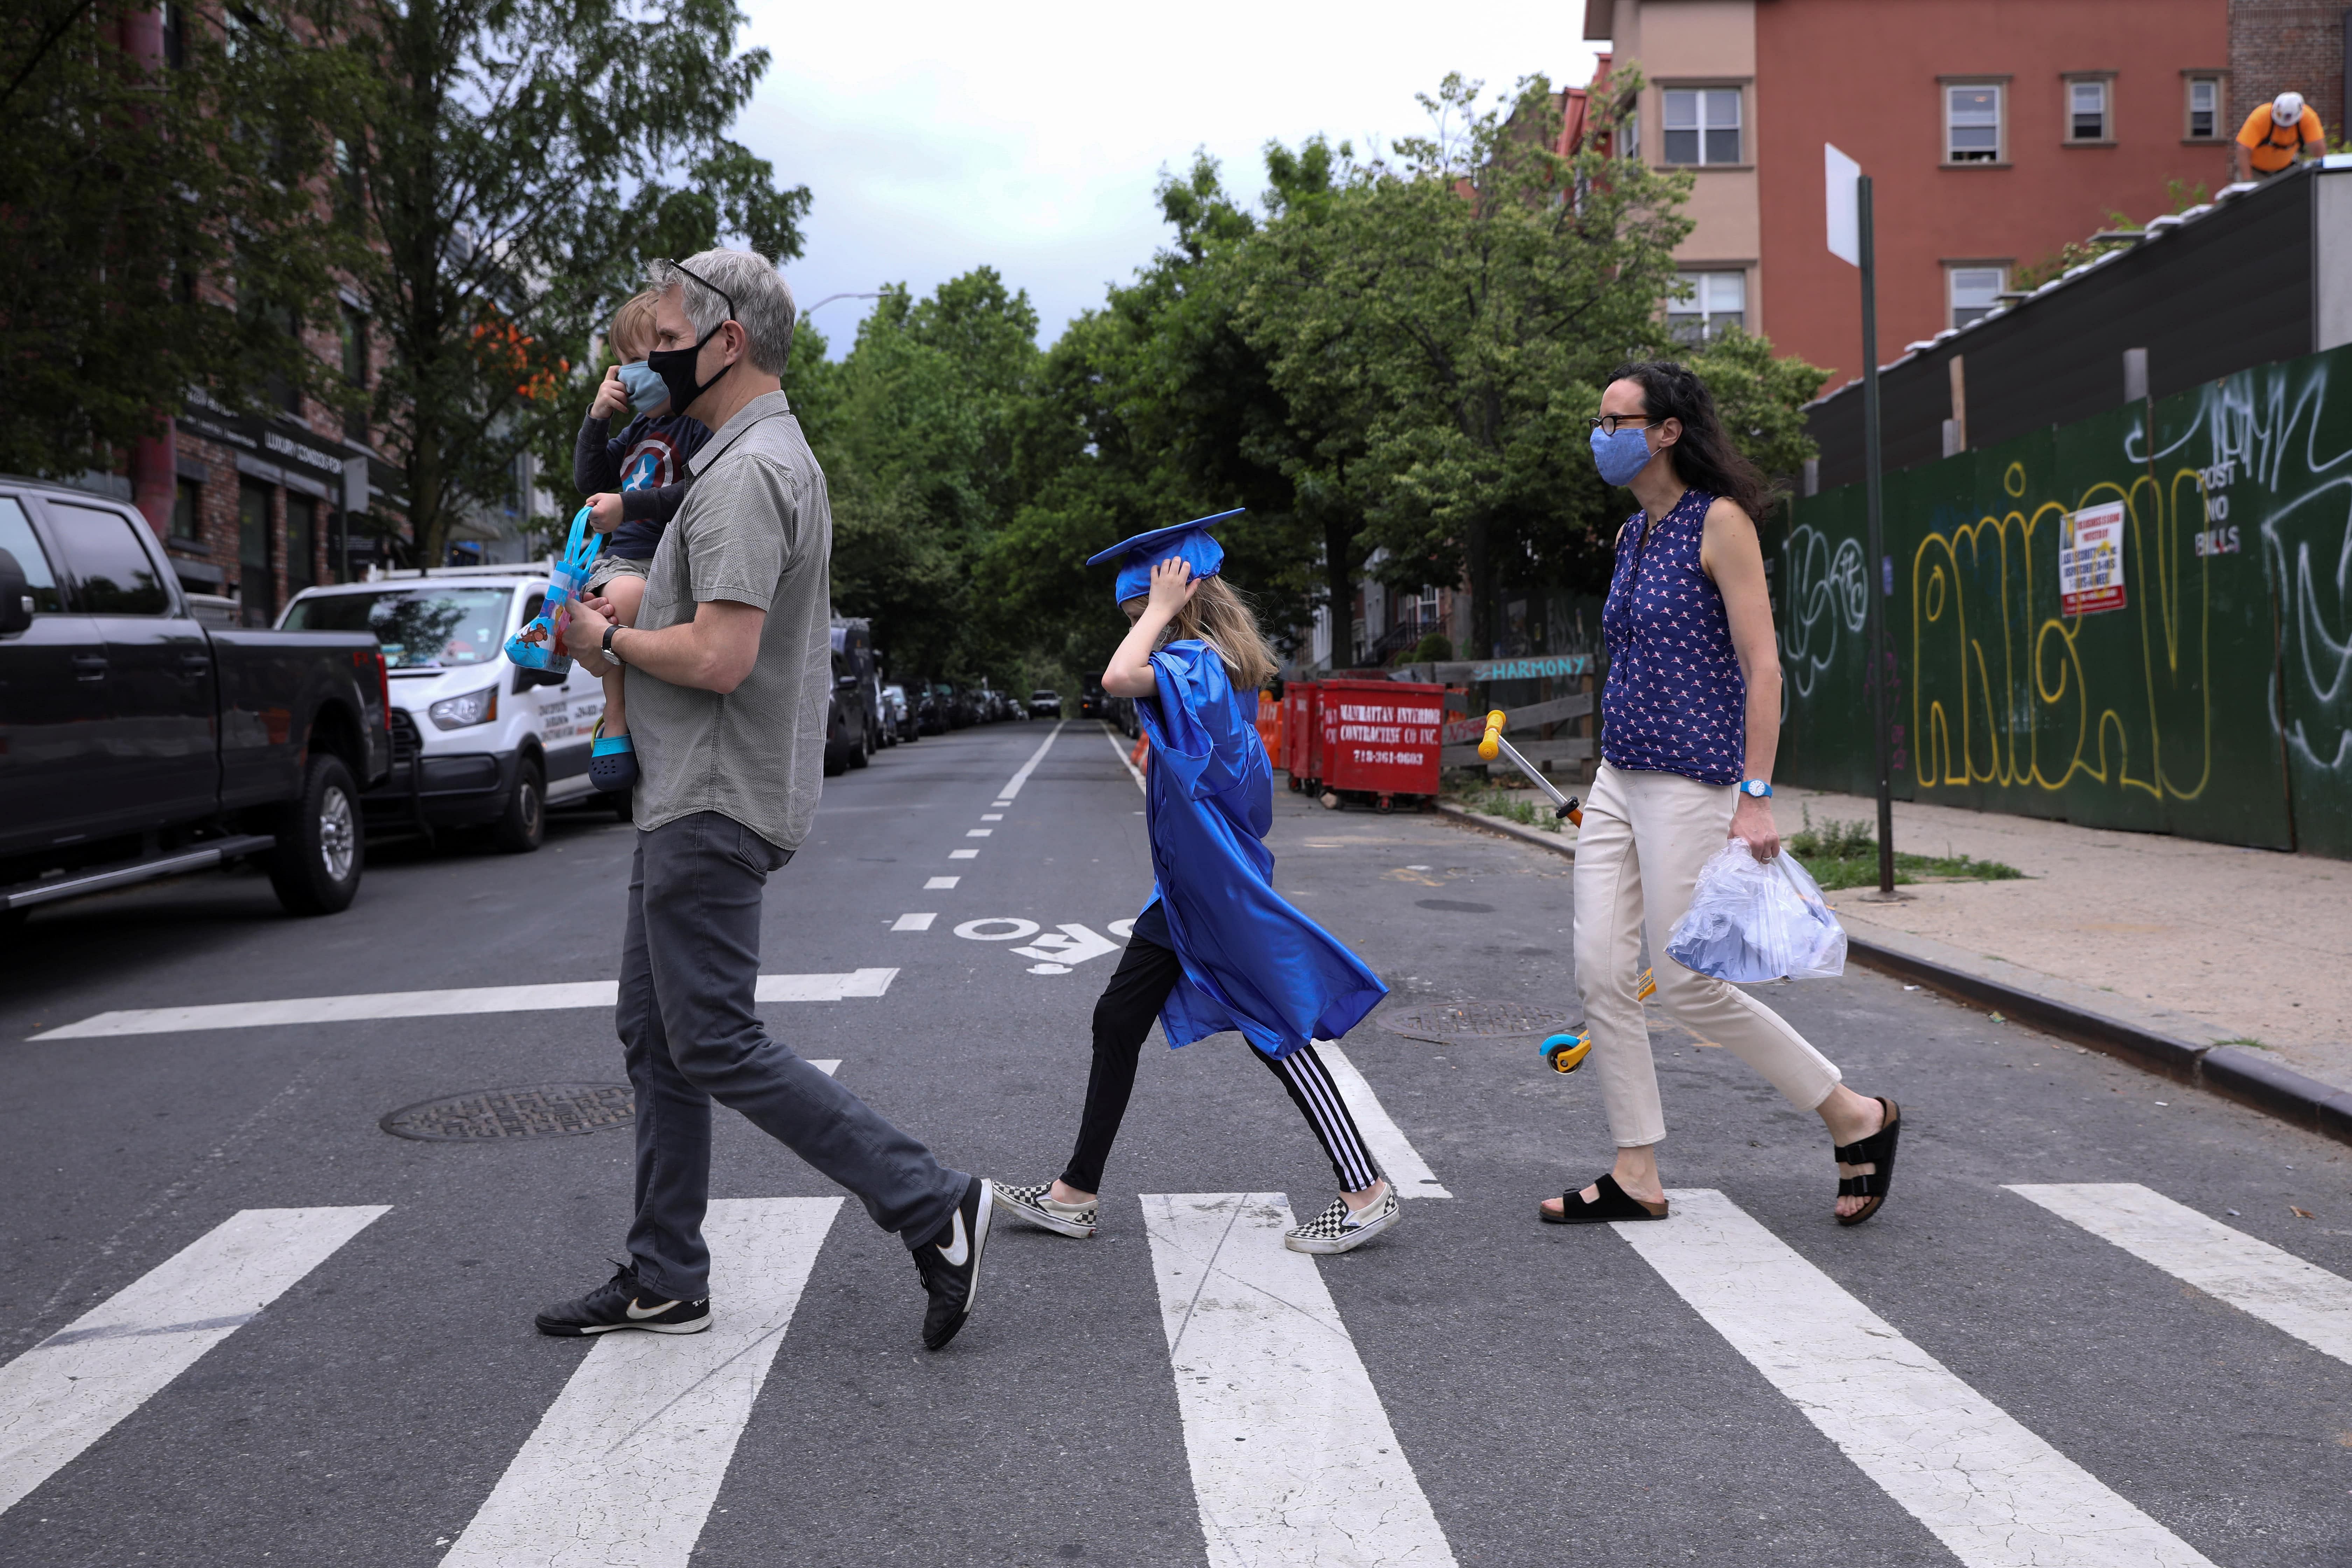 The Hassebroeks walk home after picking up supplies in preparation for Lydia Hassebroek's digital graduation during the outbreak of the coronavirus disease (COVID-19) in Brooklyn, New York. Credit: Reuters Photo